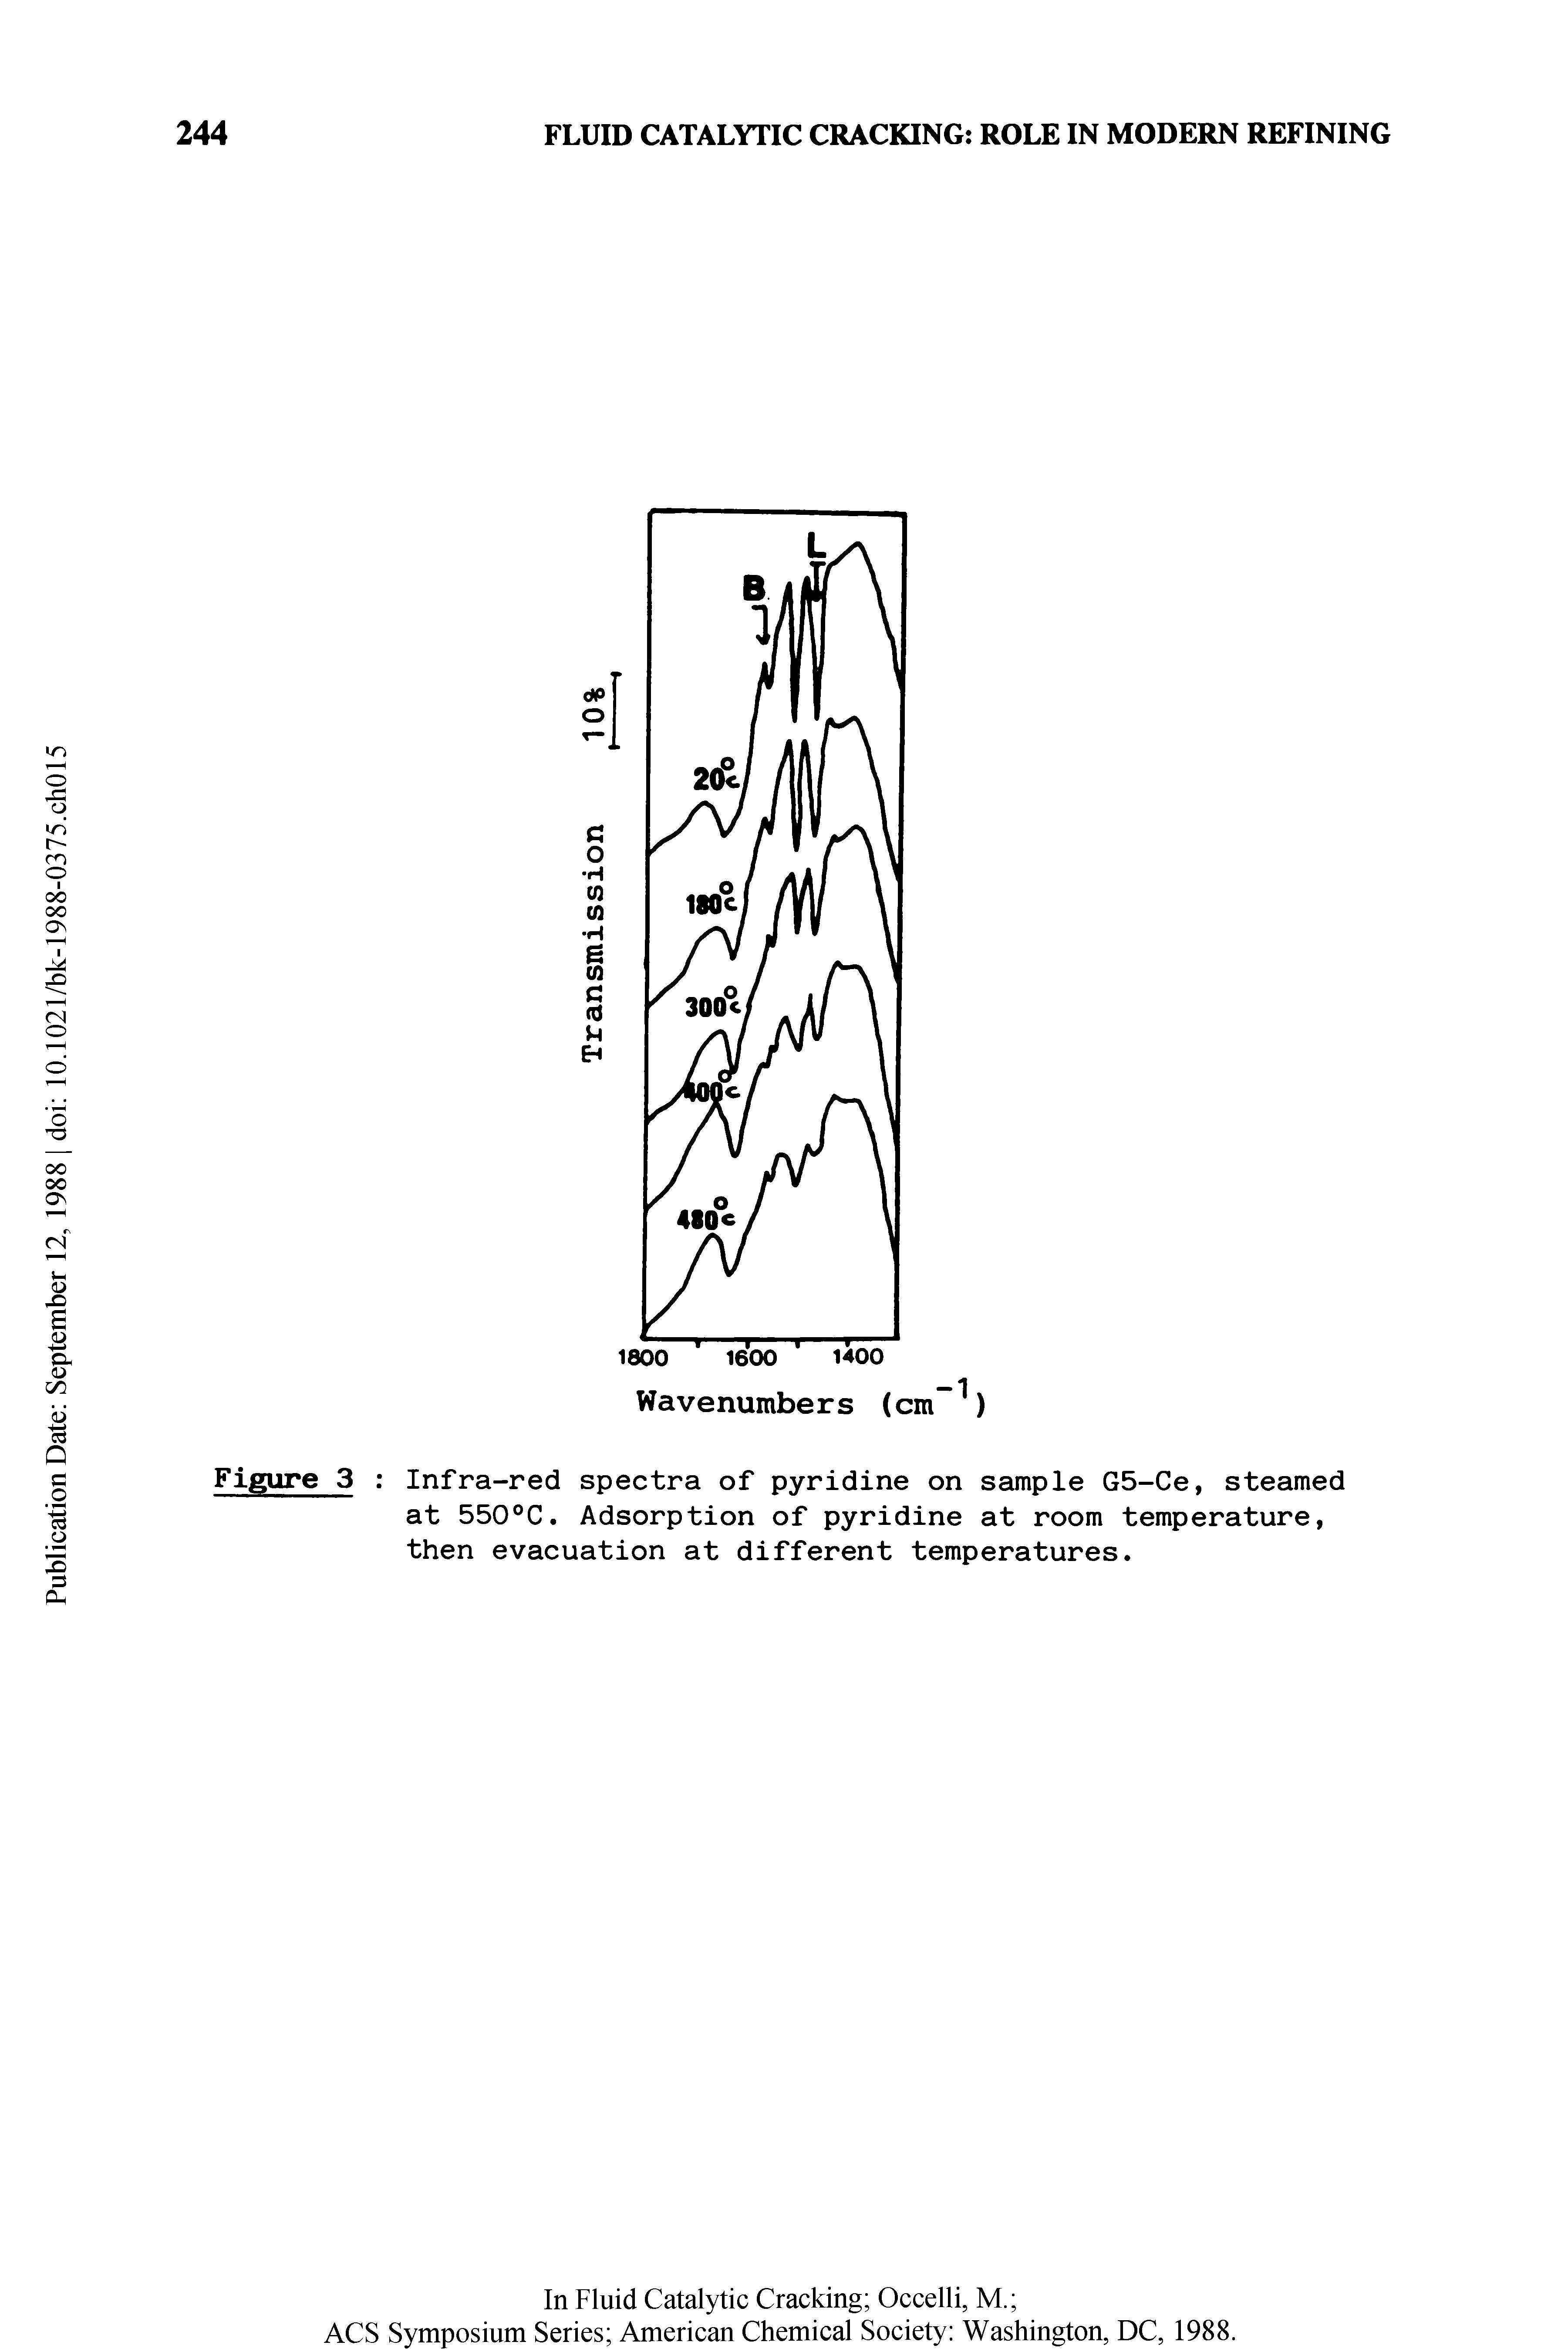 Figure 3 Infra-red spectra of pyridine on sample G5-Ce, steamed at 550°C. Adsorption of pyridine at room temperature, then evacuation at different temperatures.